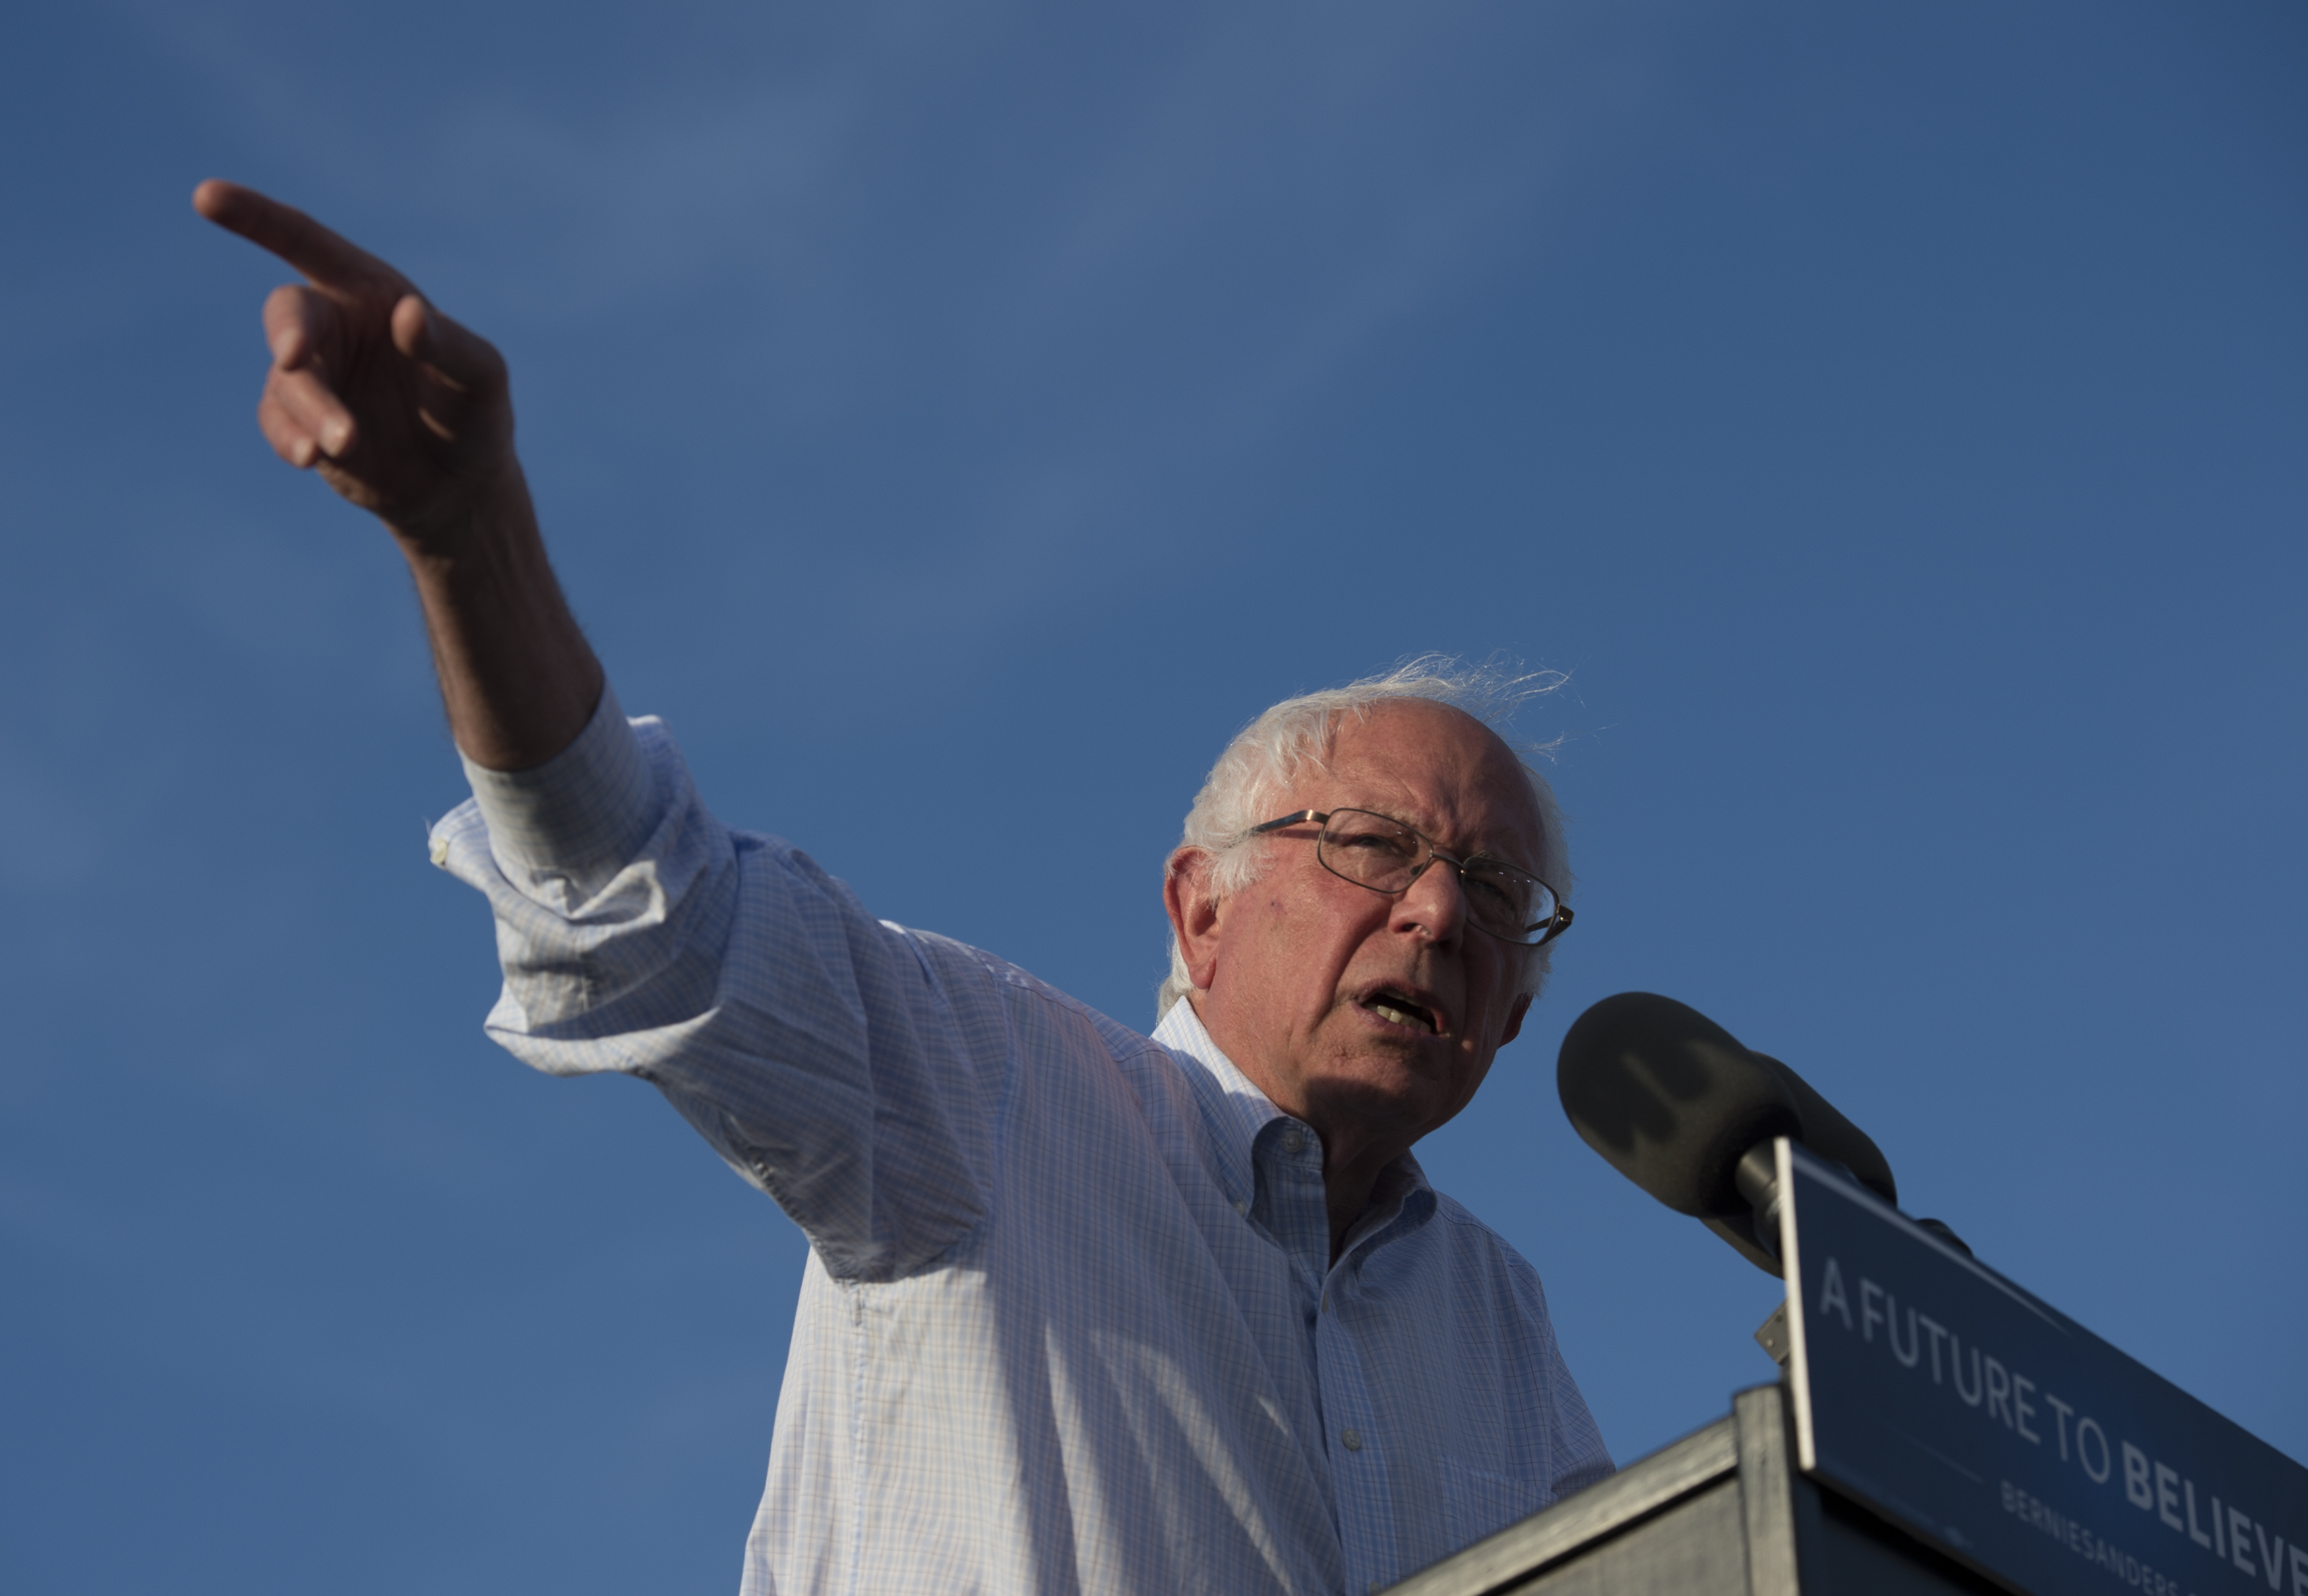 (FILES) This file photo taken on June 8, 2016 shows Democratic Presidential Candidate Bernie Sanders  during A Future to Believe In rally in Washington, DC.   Bernie Sanders said June 24, 2016 he will vote for Hillary Clinton in the US presidential election in November, bowing to his former rival for the White House but stopping short of a full endorsement.Asked on MSNBC whether he would cast his ballot for Clinton, the Vermont senator who waged a surprisingly tough campaign during the primaries said, "Yes."  / AFP PHOTO / MOLLY RILEY